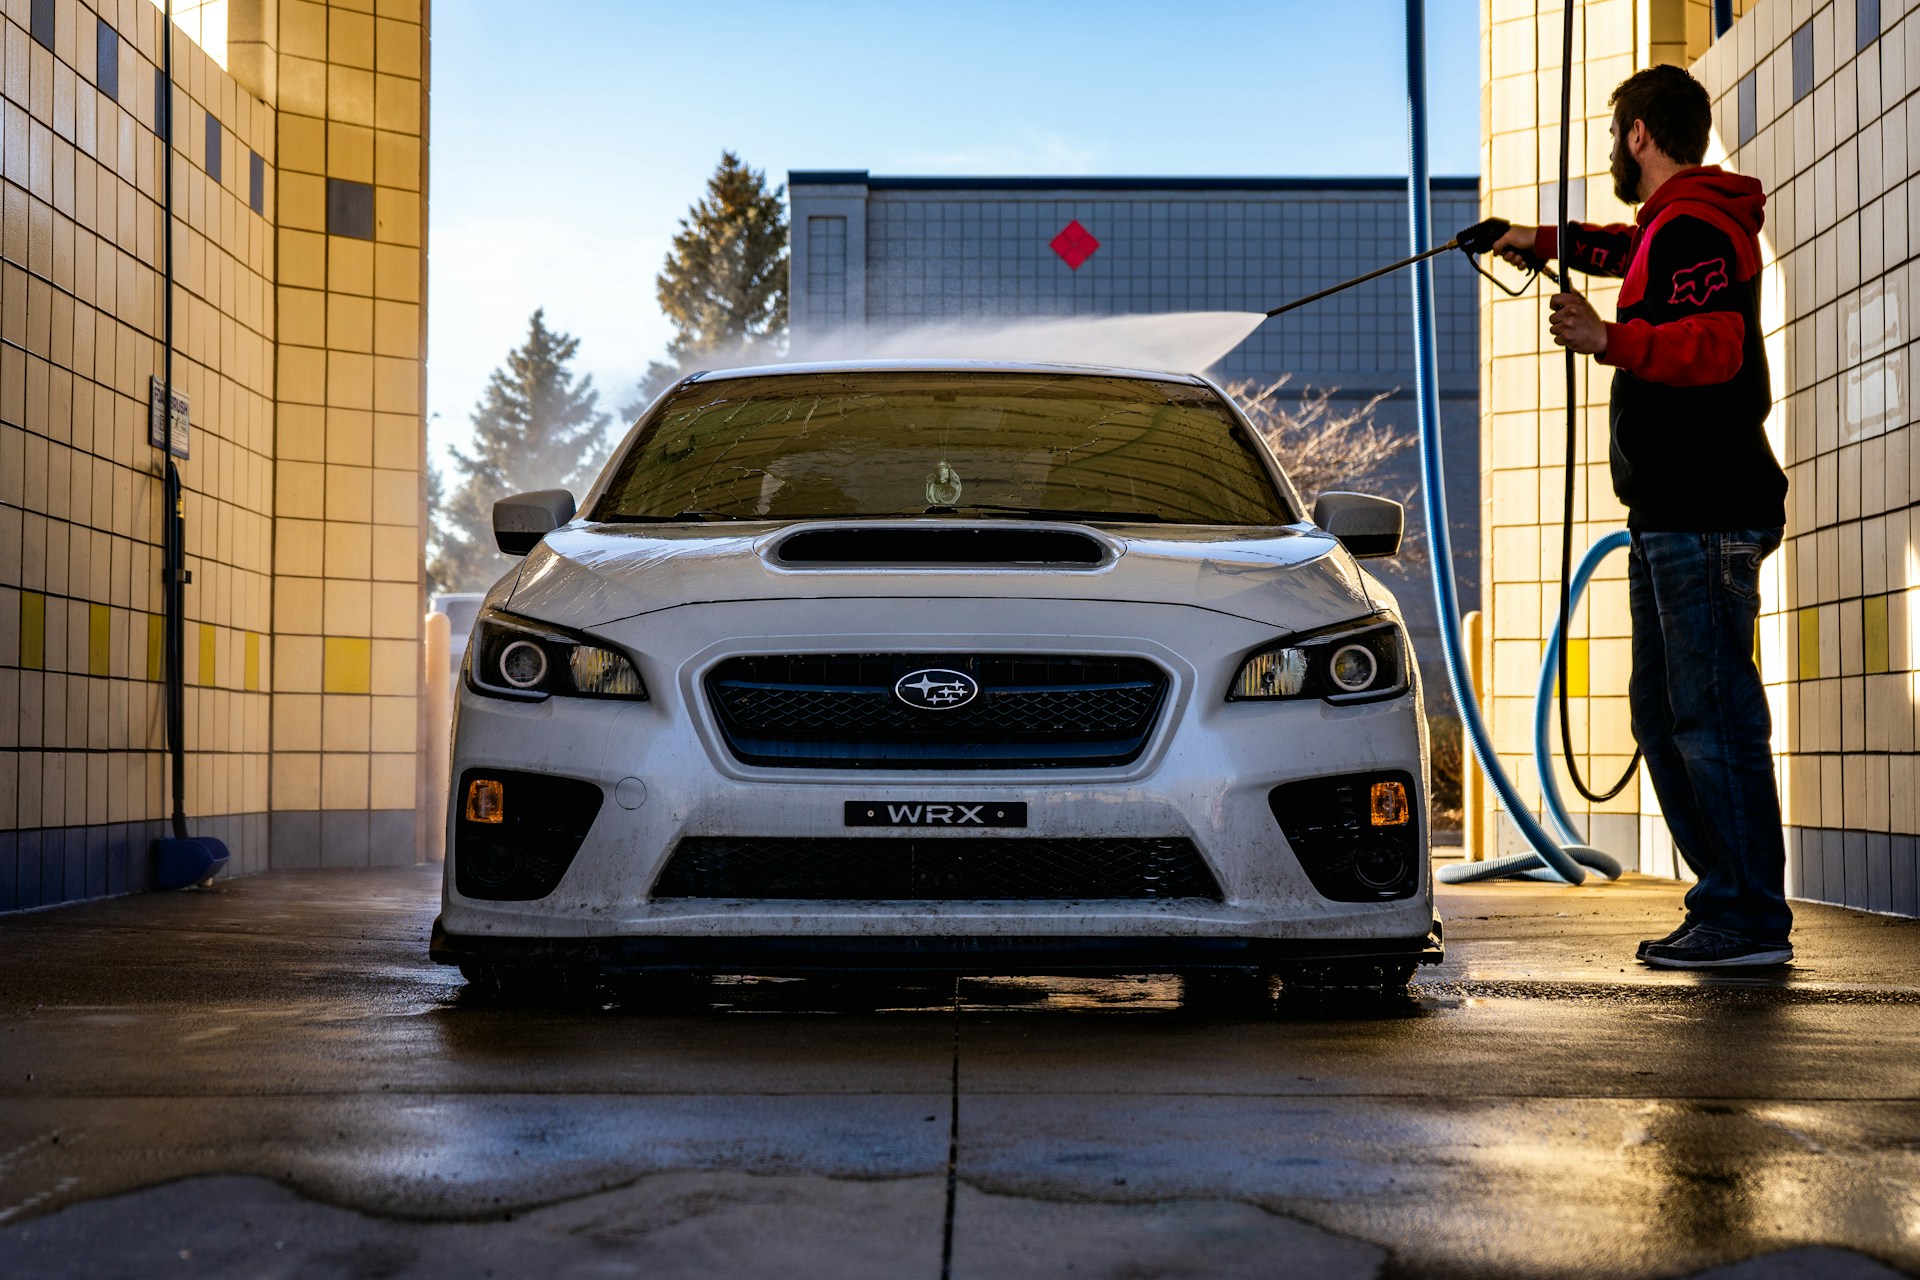 A WRX being hosed down by a car wash employee